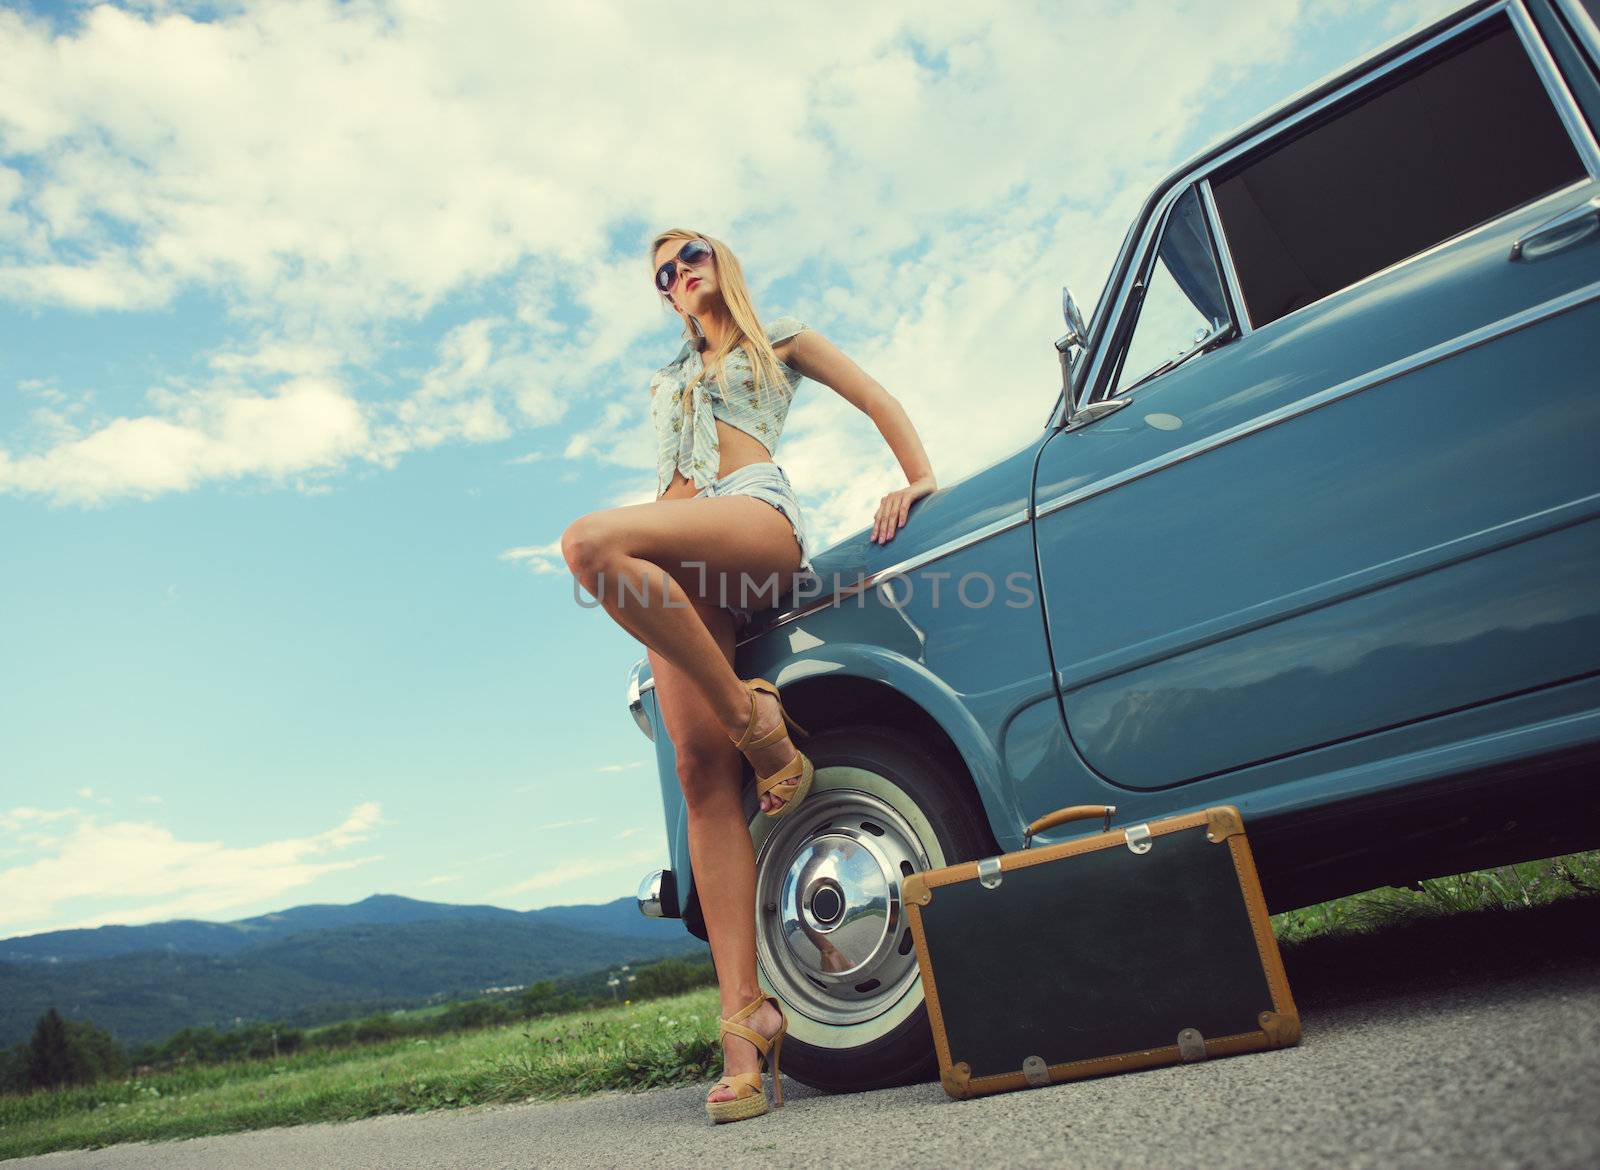 Fashion model with vintage cars, cloudy sky on background